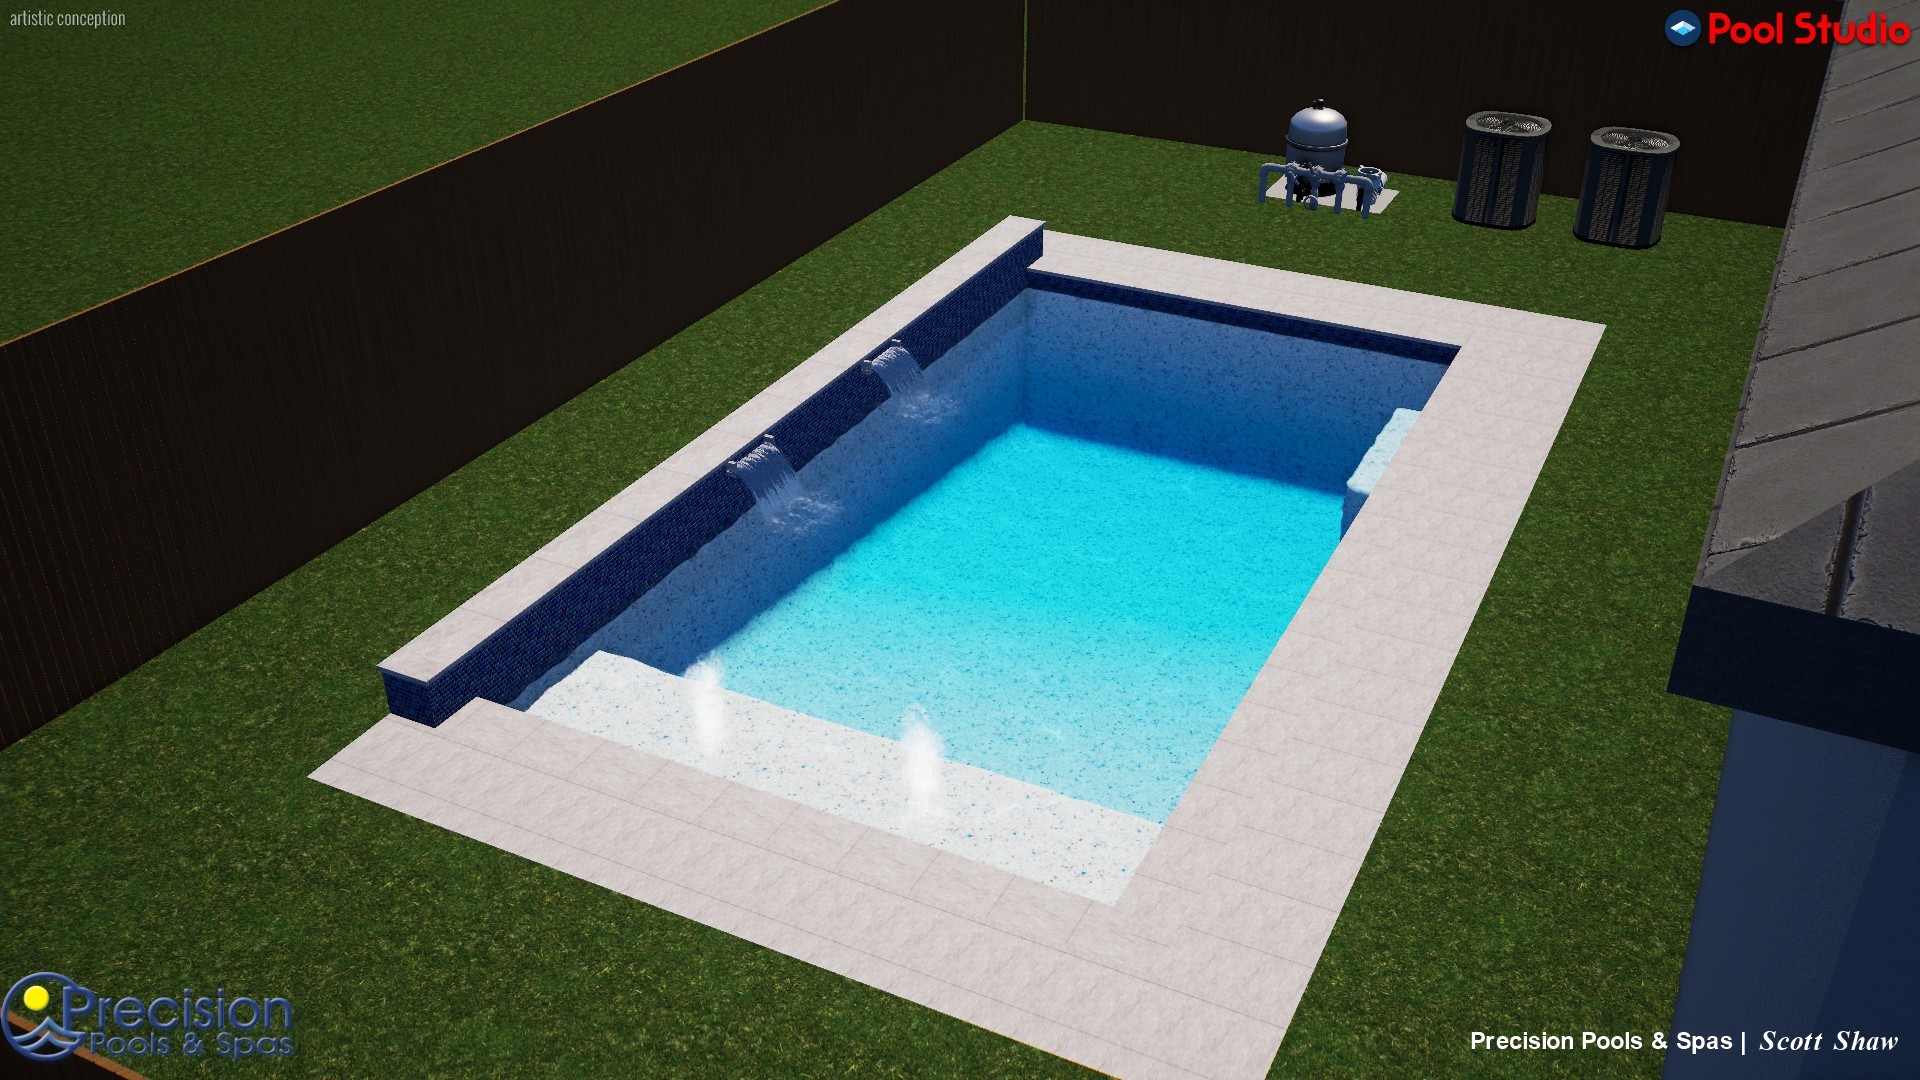 Pool rendering displaying option for use of front yard space.